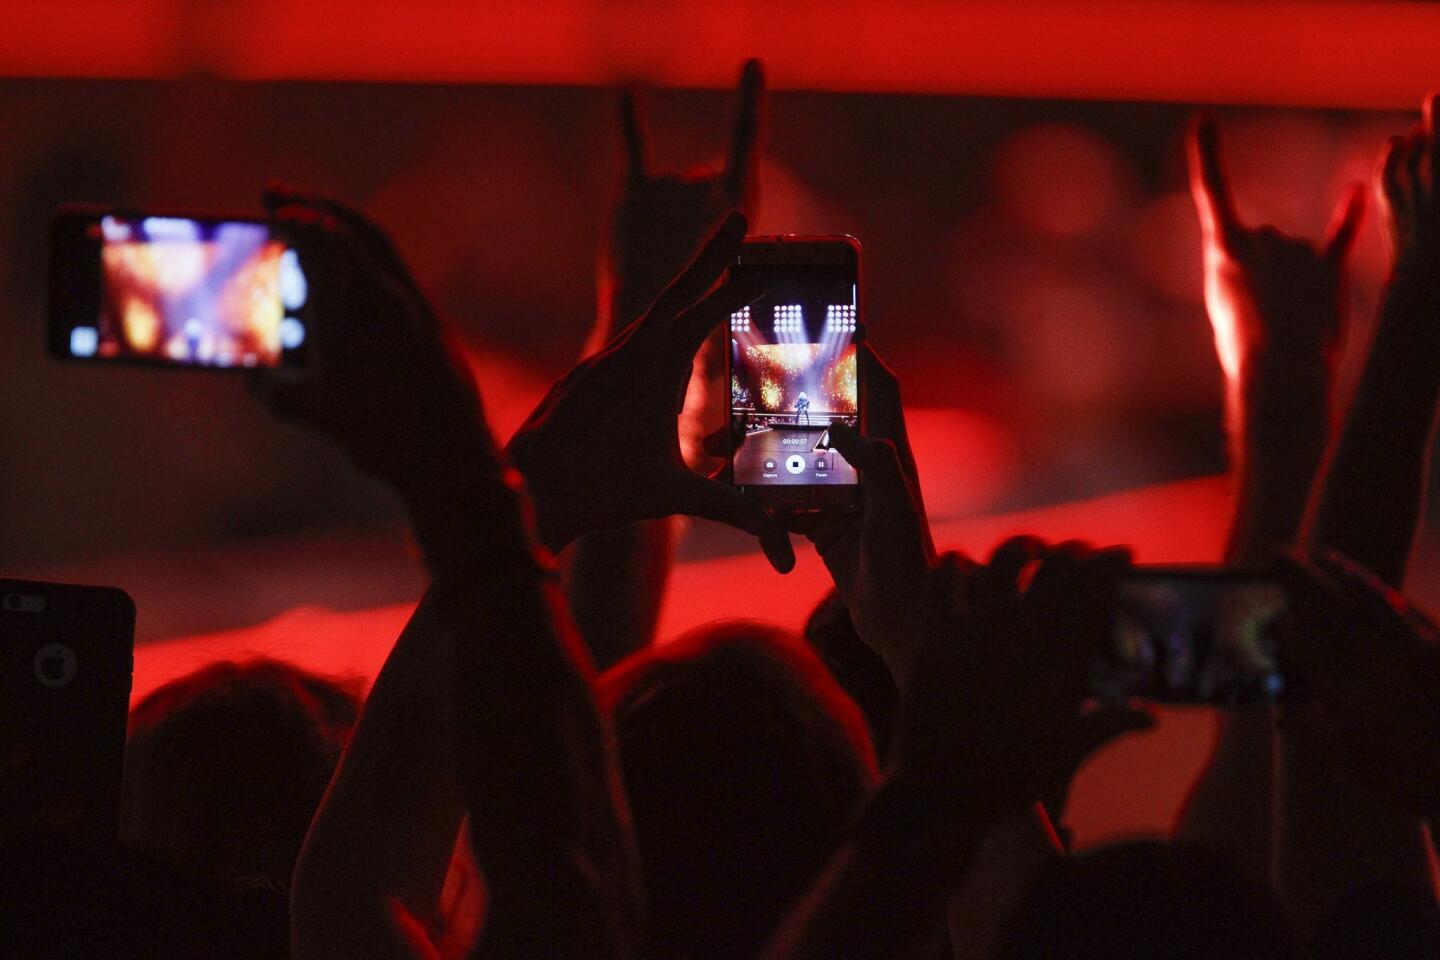 Fans record Madonna on their phones as she performs.